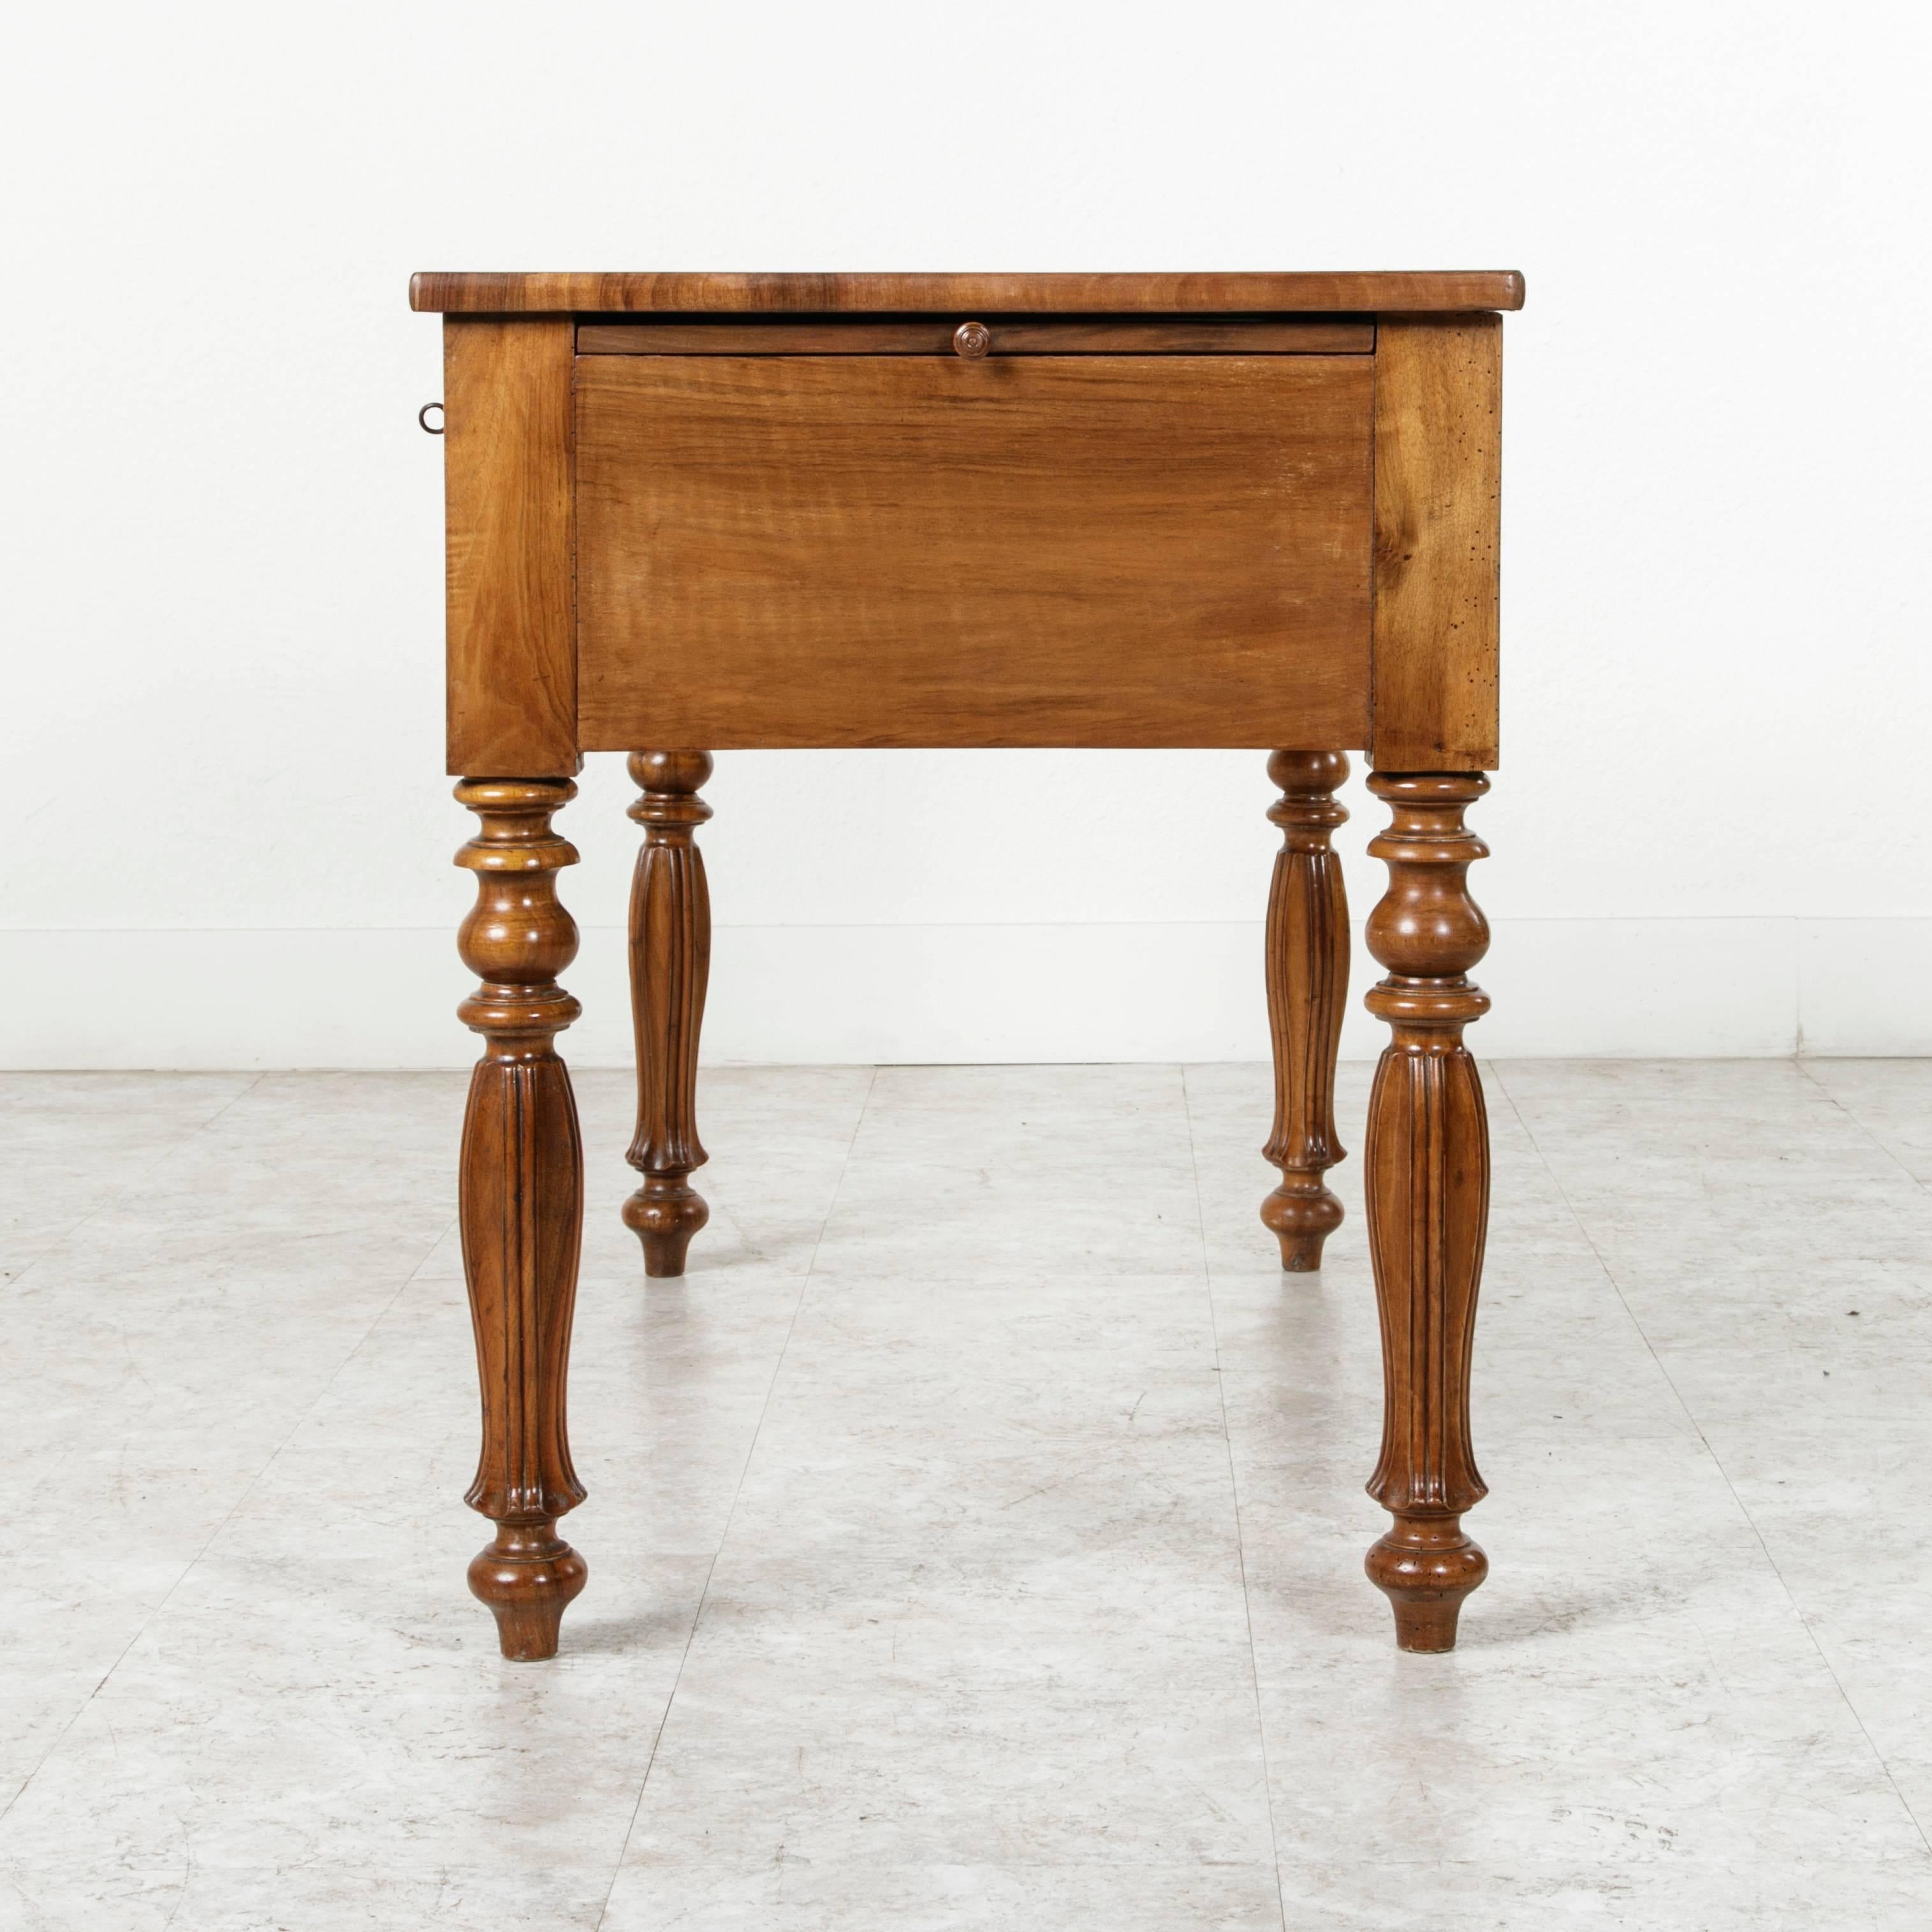 This Louis Philippe period desk is made of eye catching bookmatched burl walnut and stands on unusual turned 